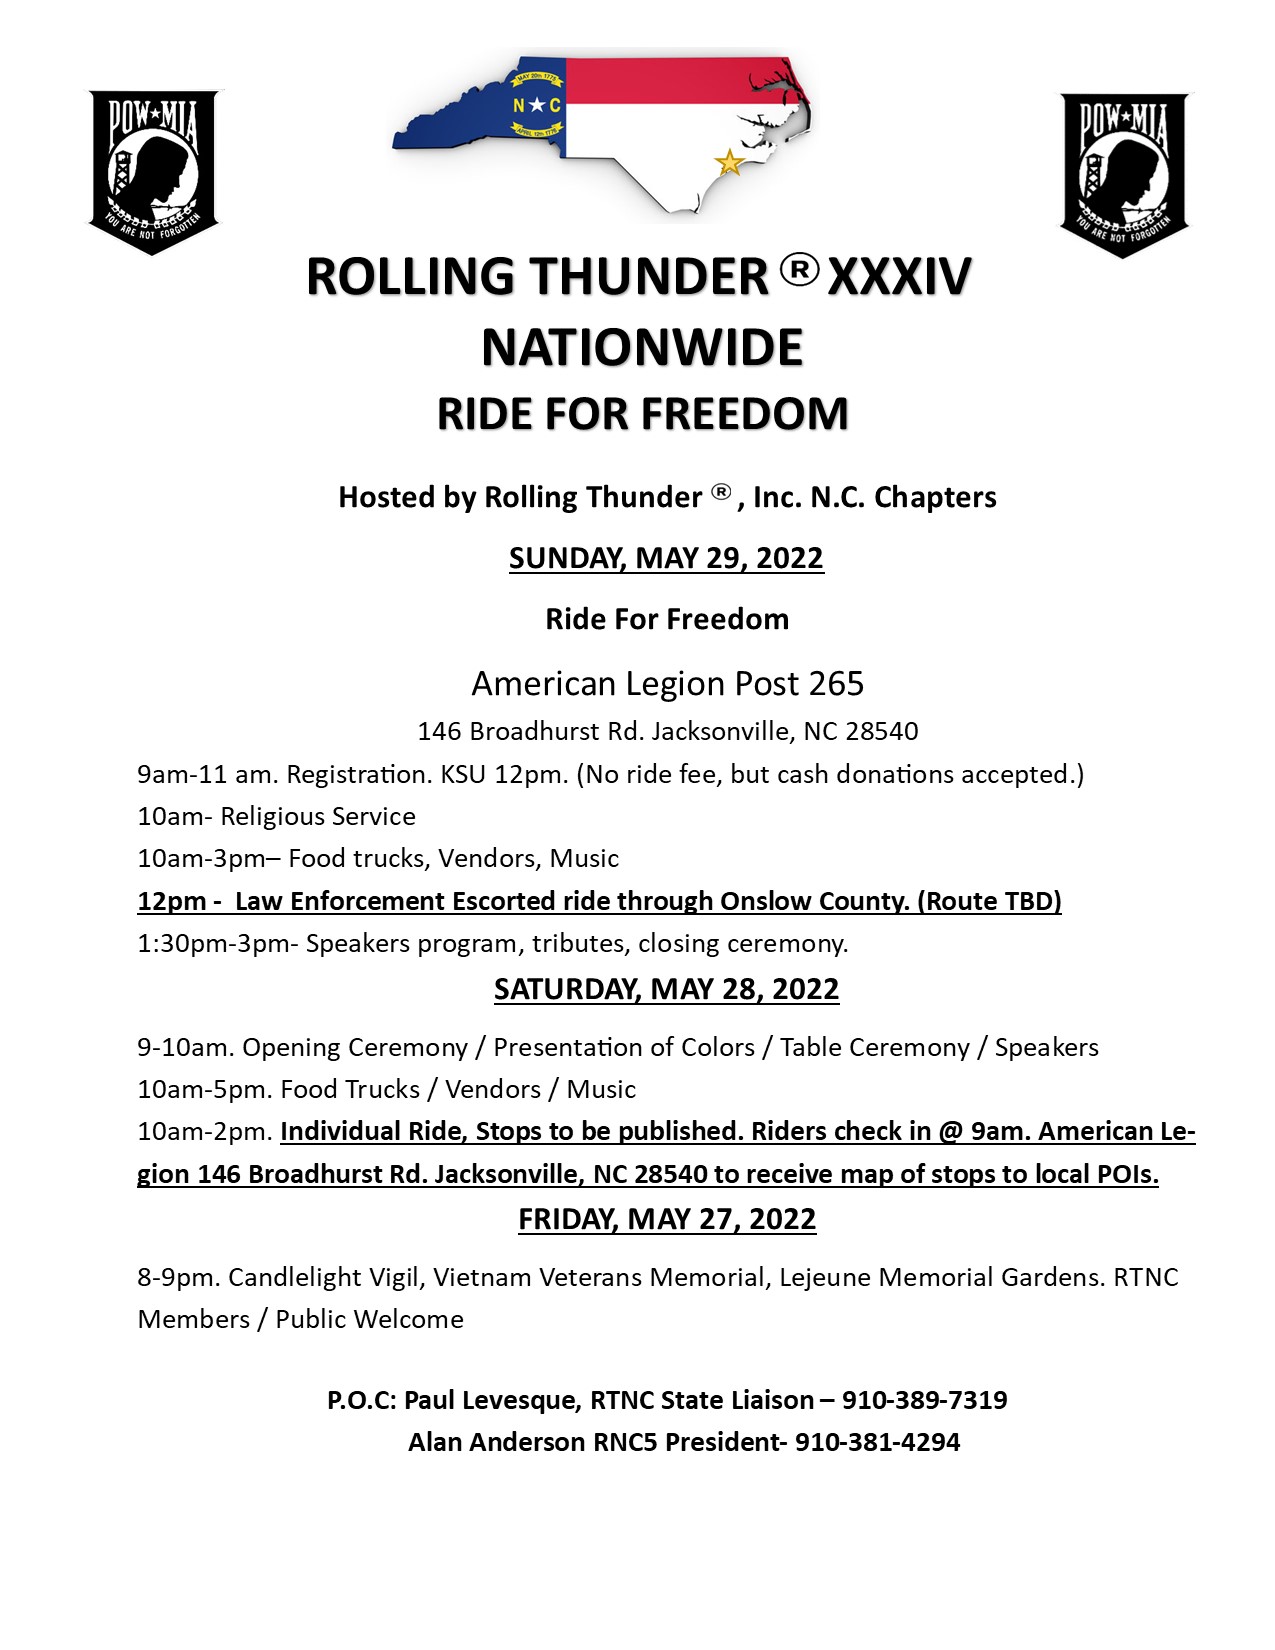 Rolling Thunder XXXIX Ride For Freedom